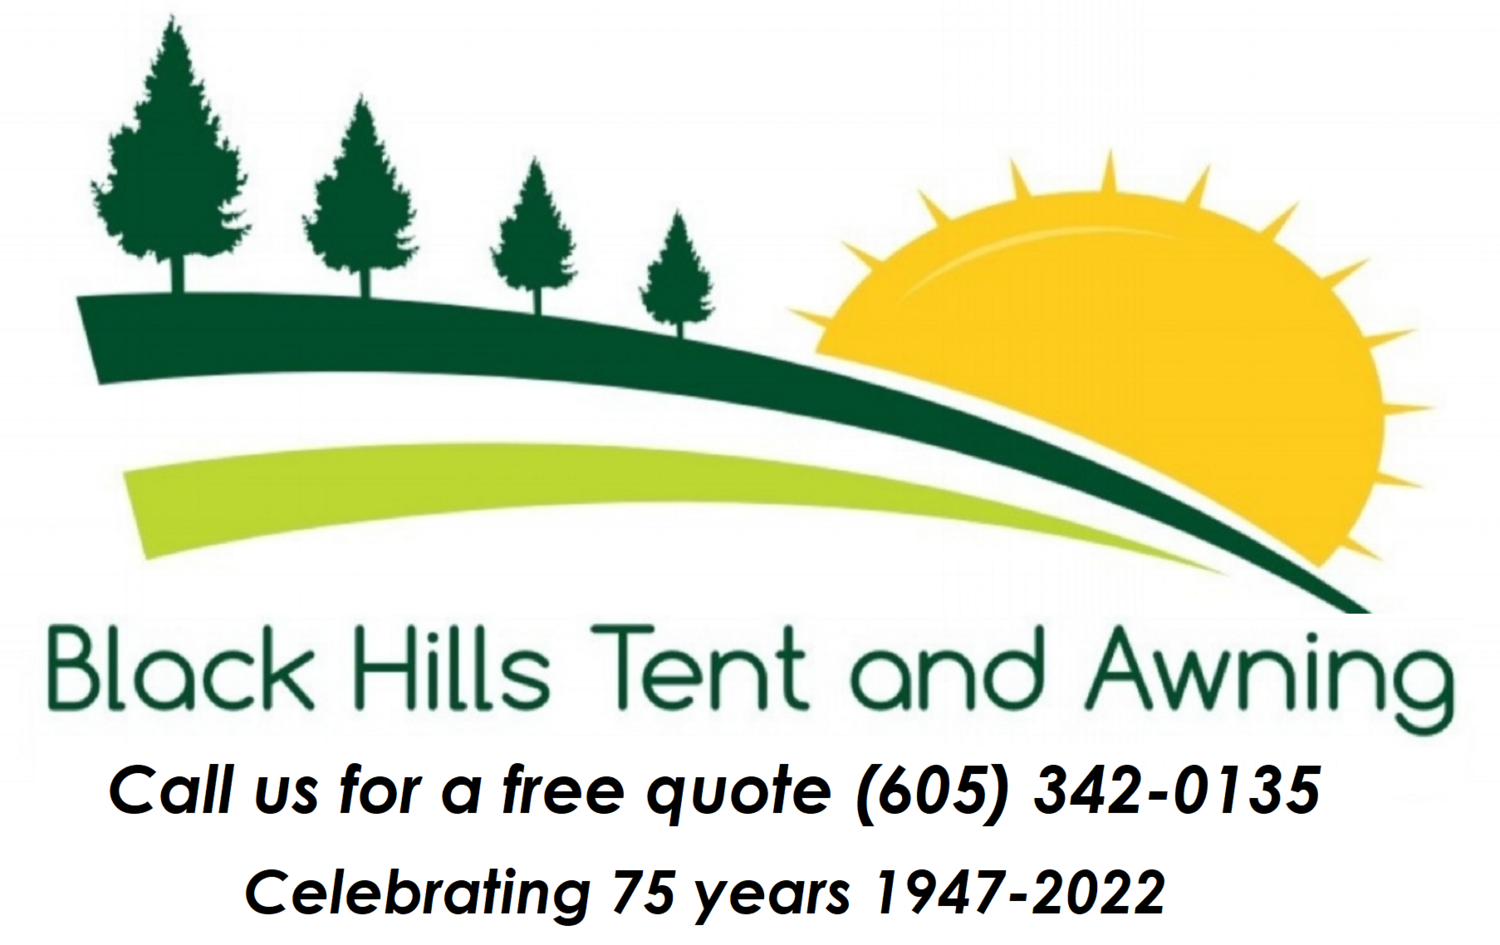 Black Hills Tent and Awning